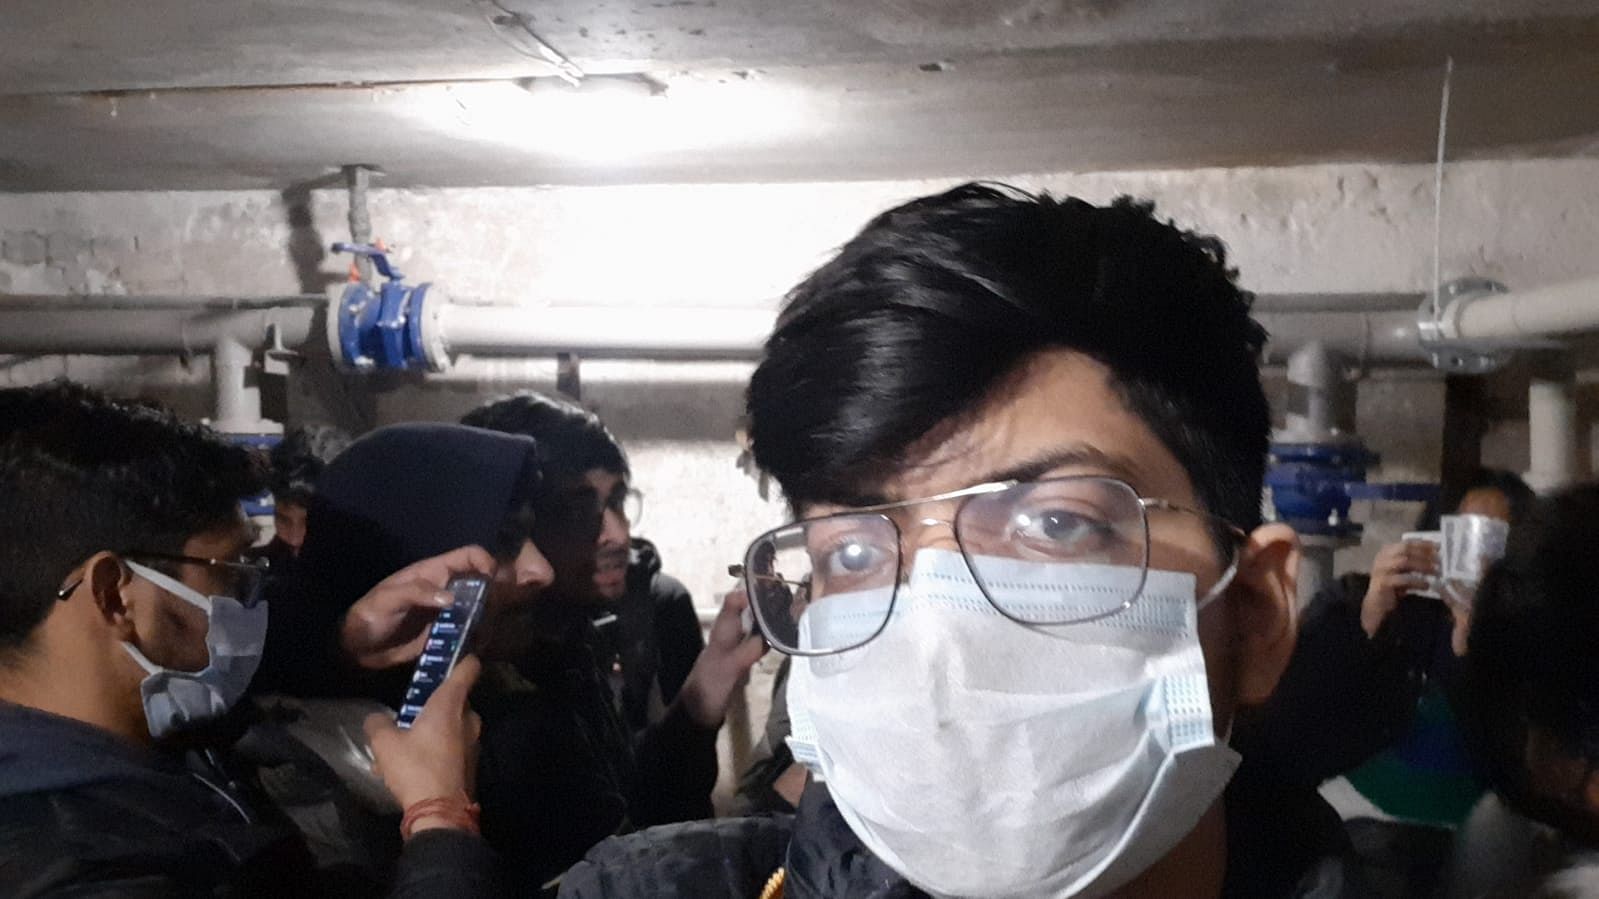 Aditya Singh, 17, takes a selfie alongside other Indian students in an underground bunker in Ukraine’s Kharkiv Saturday. Around 50 students are taking shelter in each bunker. | Aditya Singh | By special arrangement